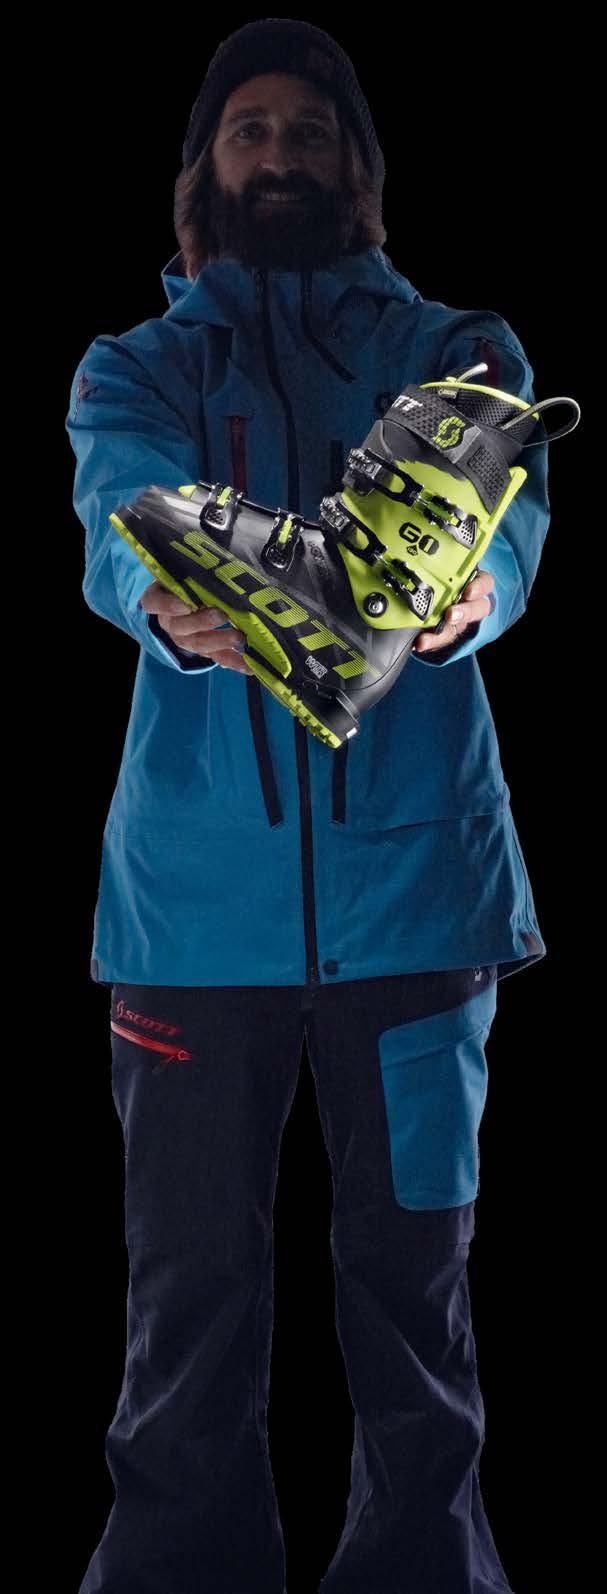 S COT T FREES ANYWHERE, ANYTIME COMFORT AND PERFORMANCE SCOTT OFFERS A FRESH LINEUP OF FREESKI-ORIENTED BOOTS FOR 2015-16 TO DRIVE SKIERS TO EXPLORE ALL MOUNTAIN TERRAIN.